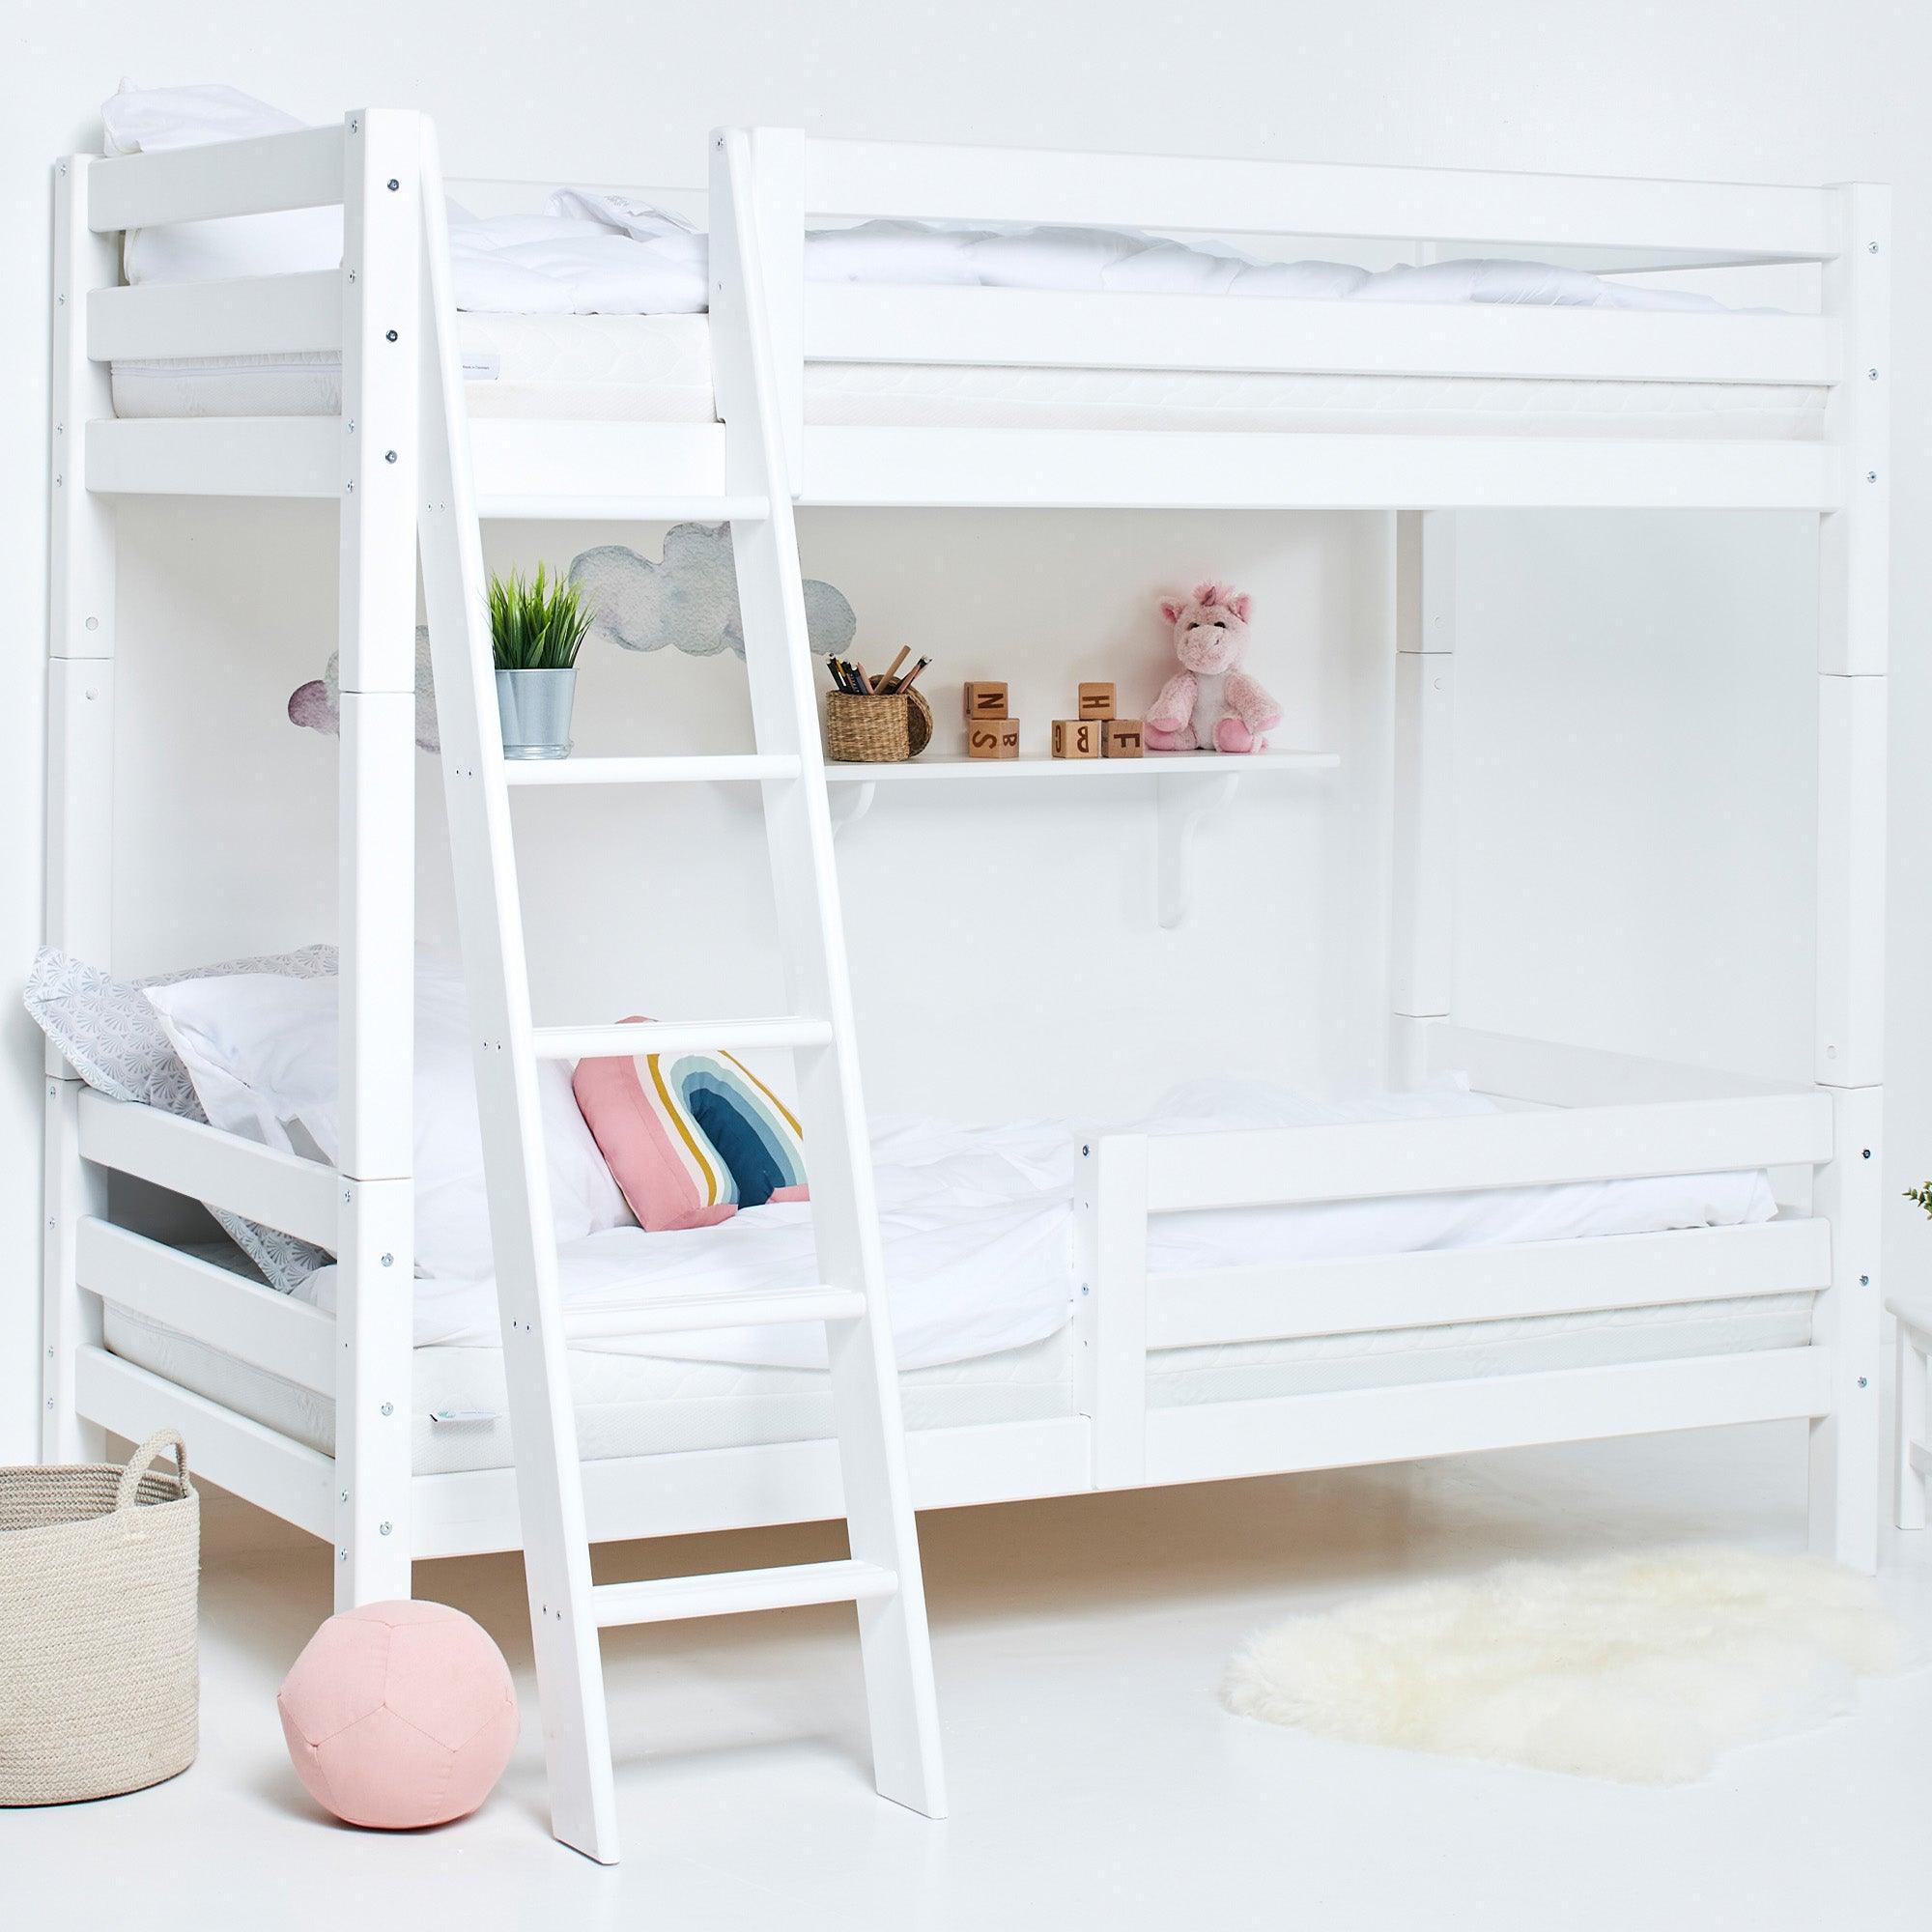 Hoppekids ECO Luxury High Bunk Bed with Bed Rail